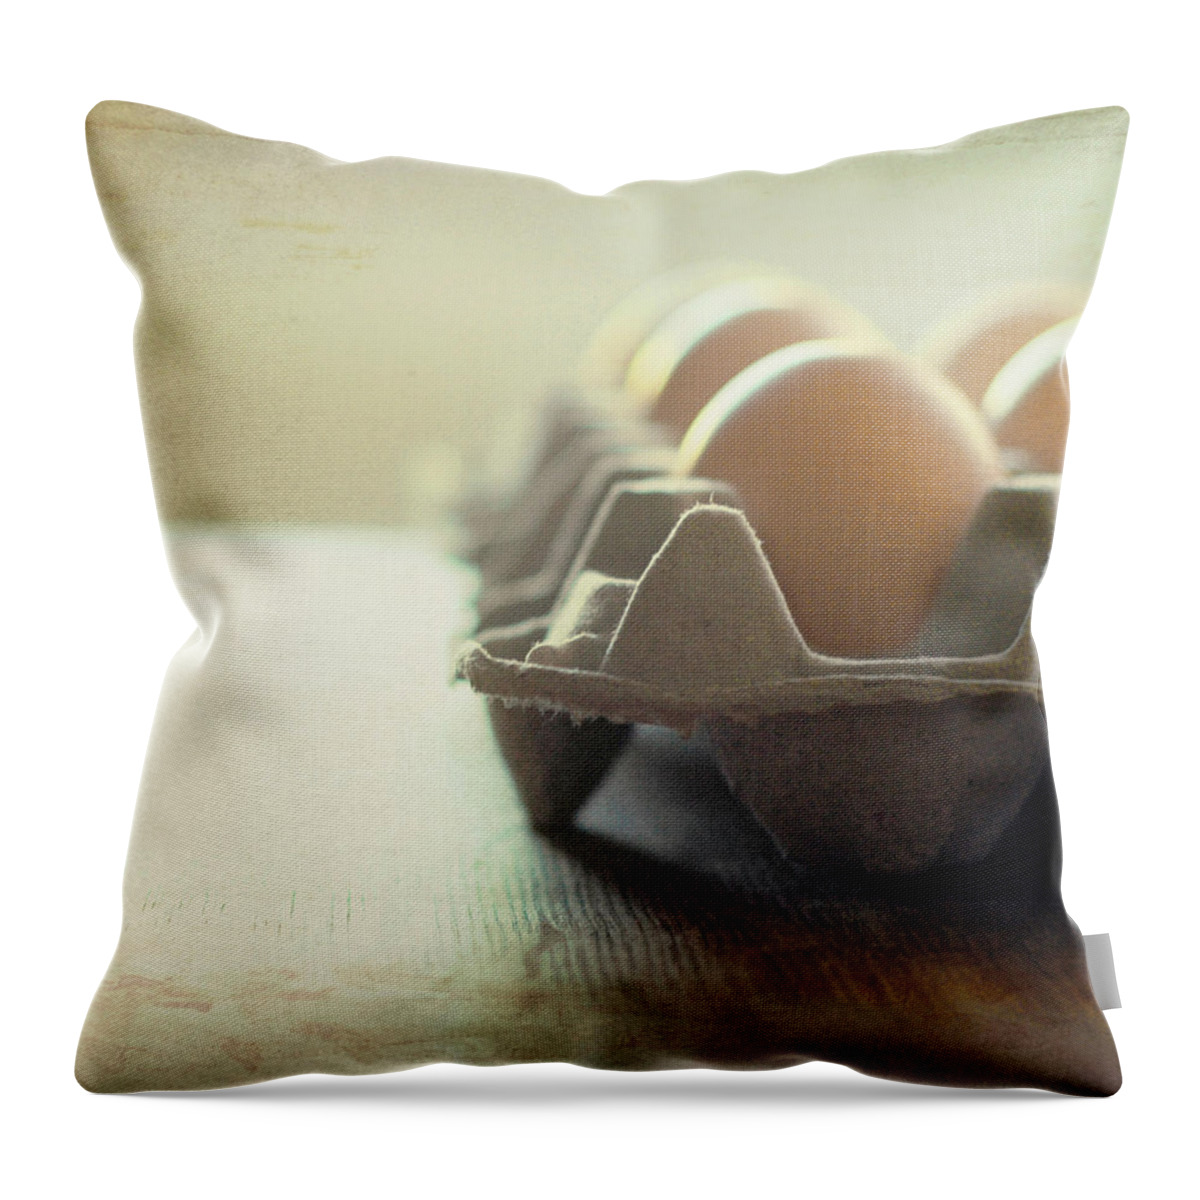 North Carolina Throw Pillow featuring the photograph Eggs In One Basket by Dawn D. Hanna